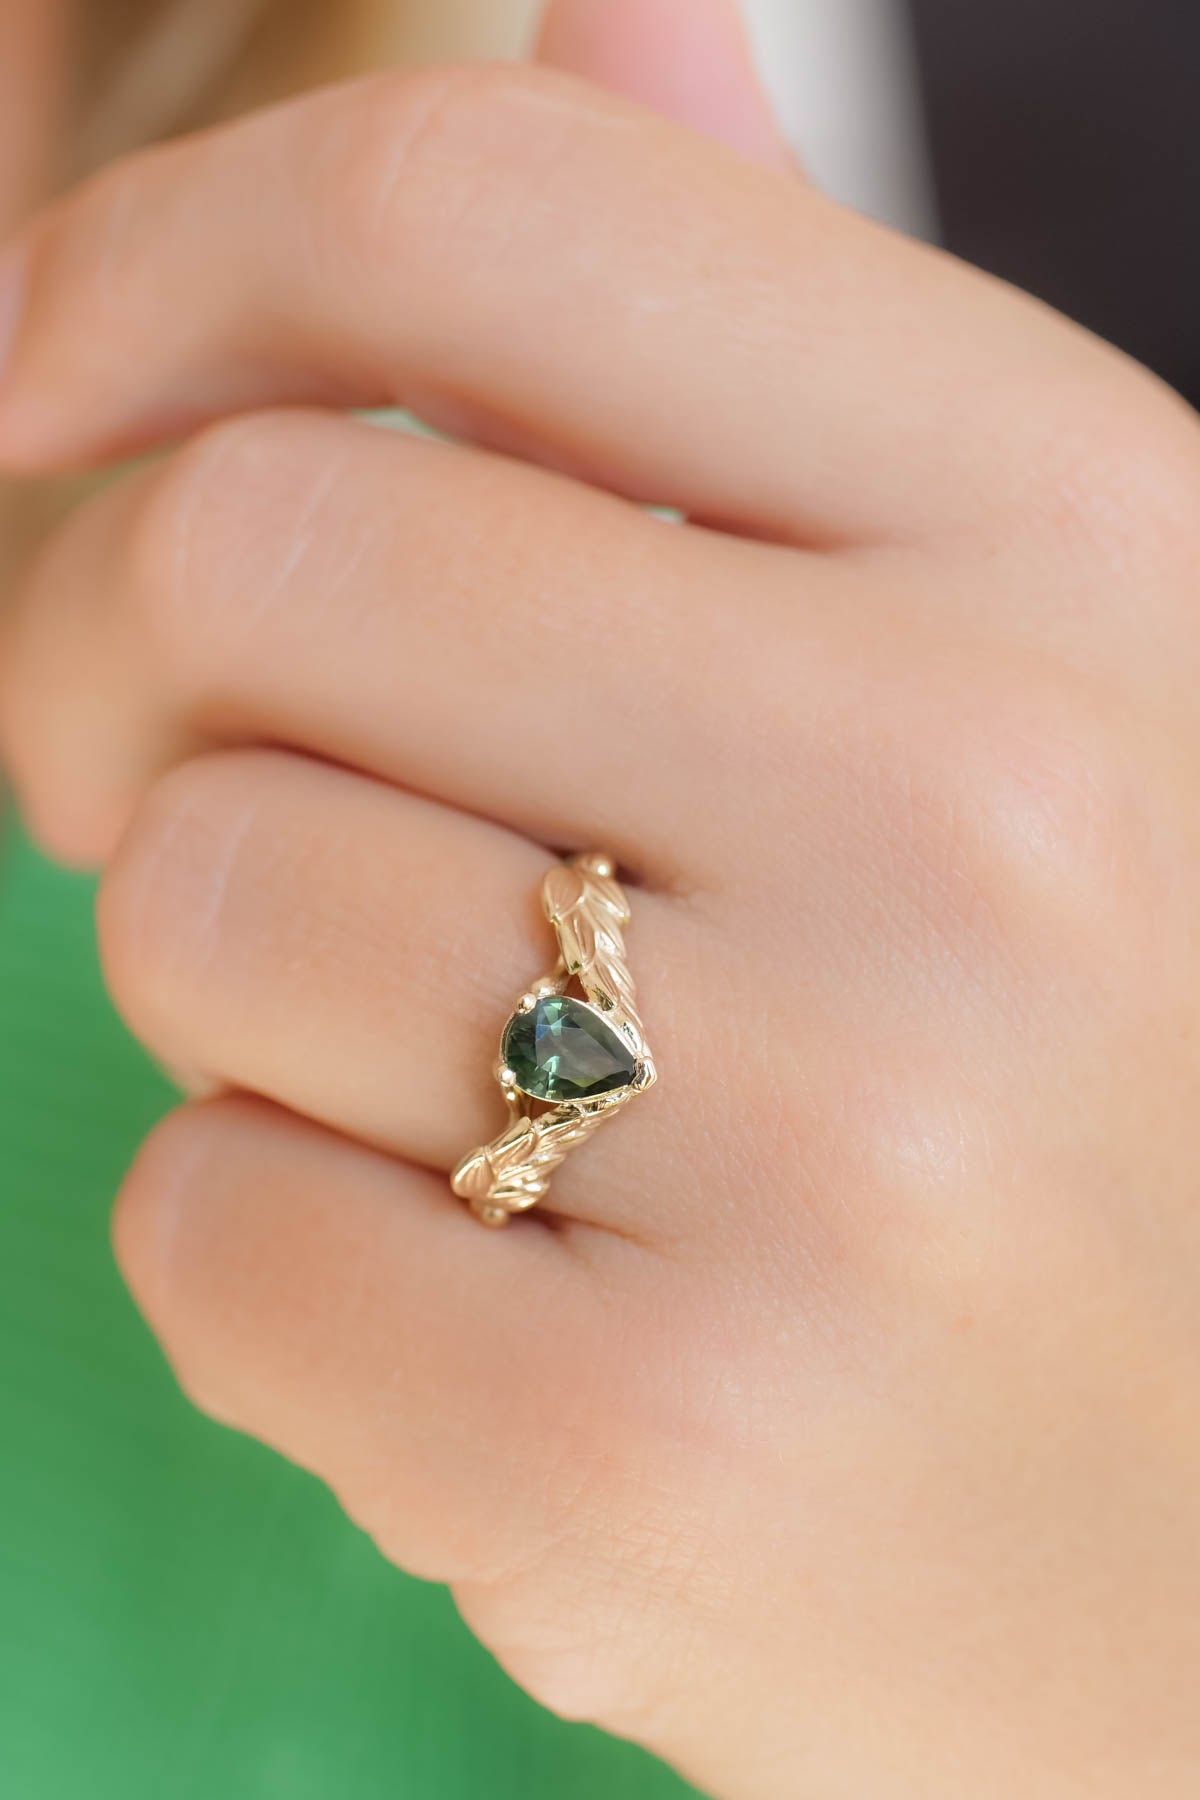 Handmade Branch Snake Ring with Natural Green Agate from Black Diamonds New  York